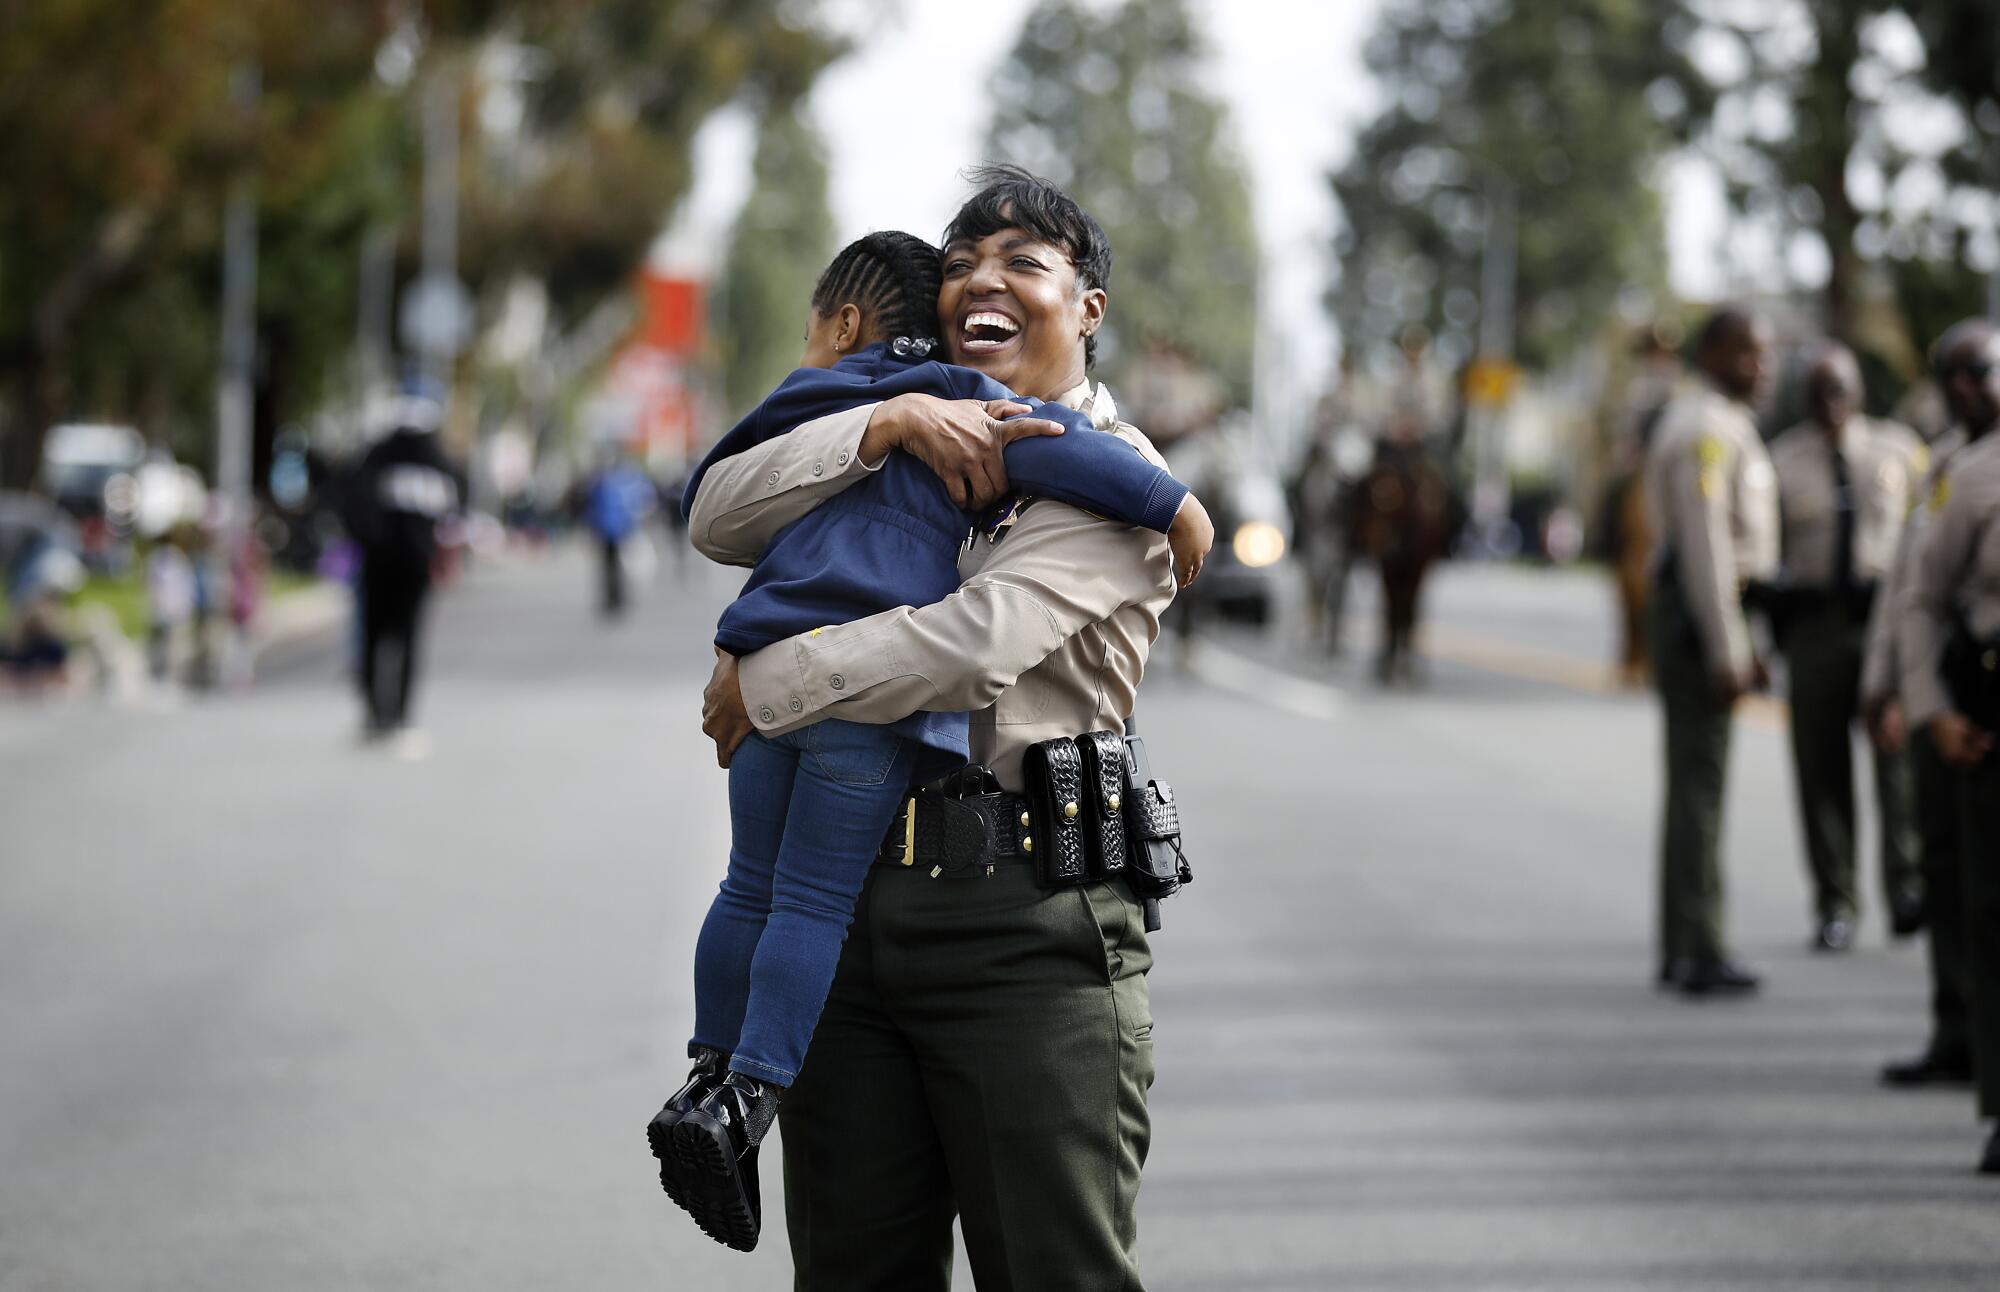 April Tardy with the Los Angeles County Sheriff's Department gets a hug from 3-year-old paradegoer Illy.